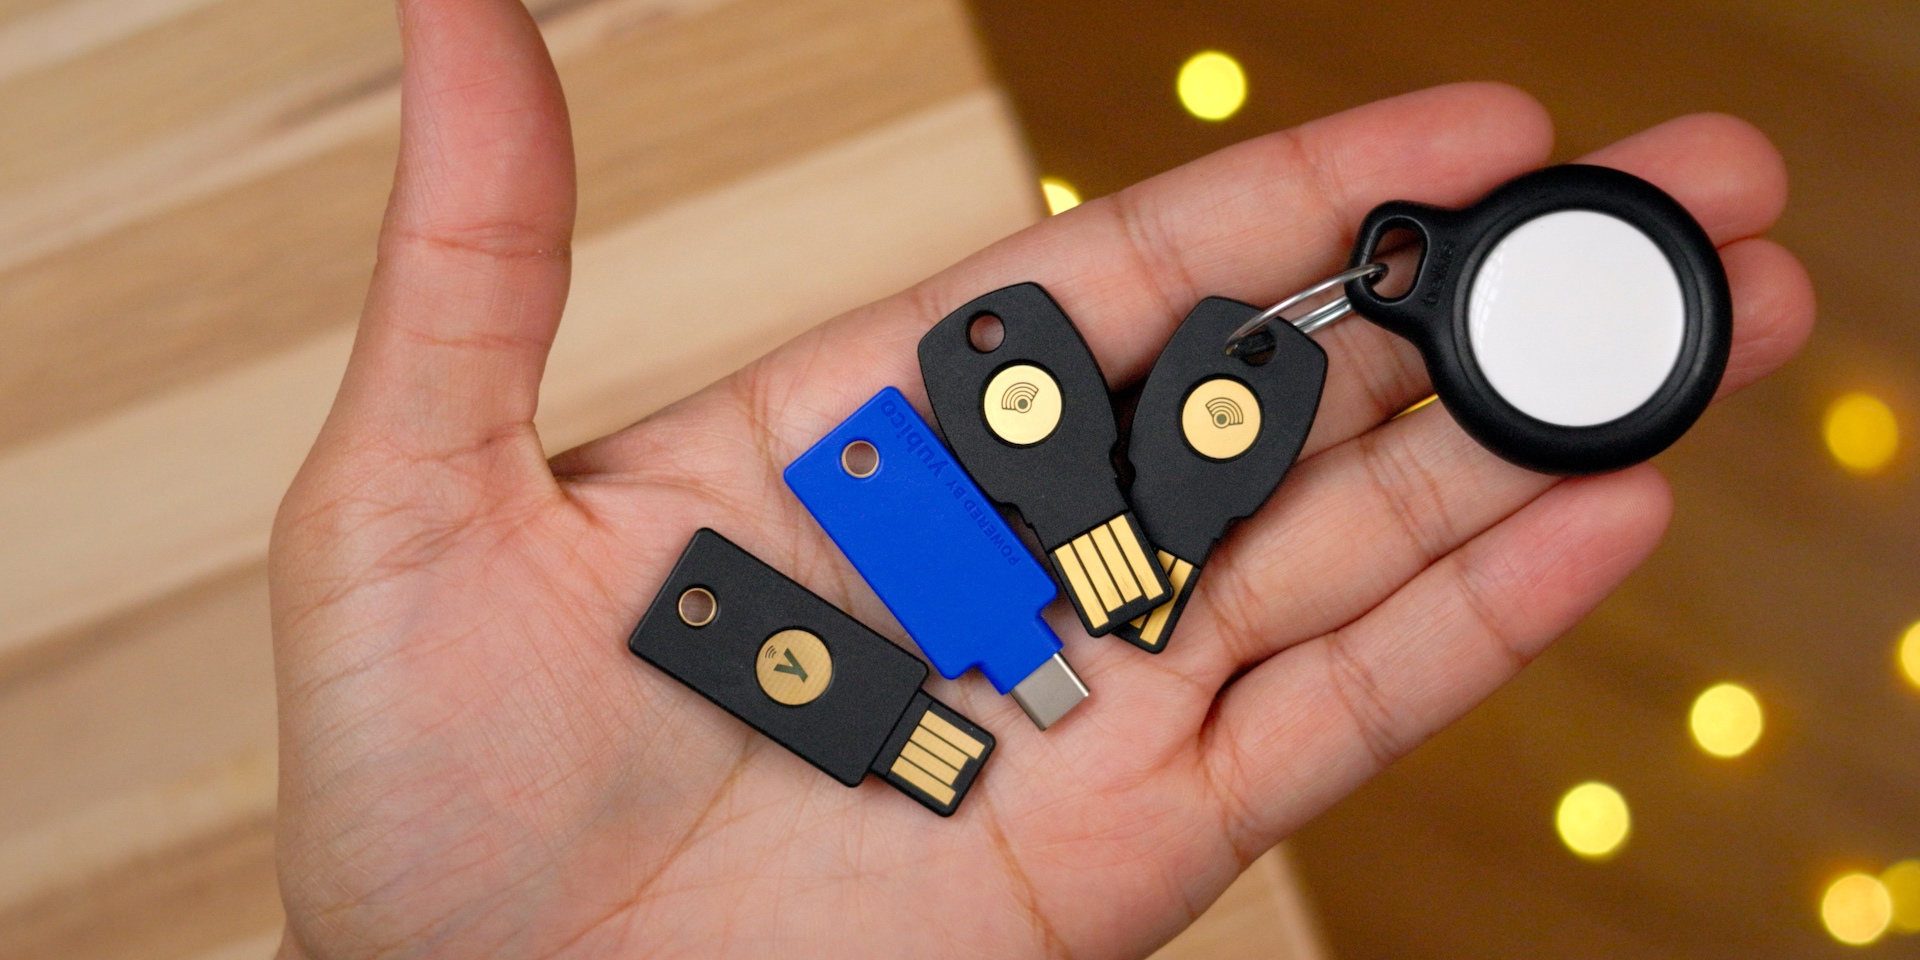 Introducing the expanded Security Key Series, featuring Enterprise